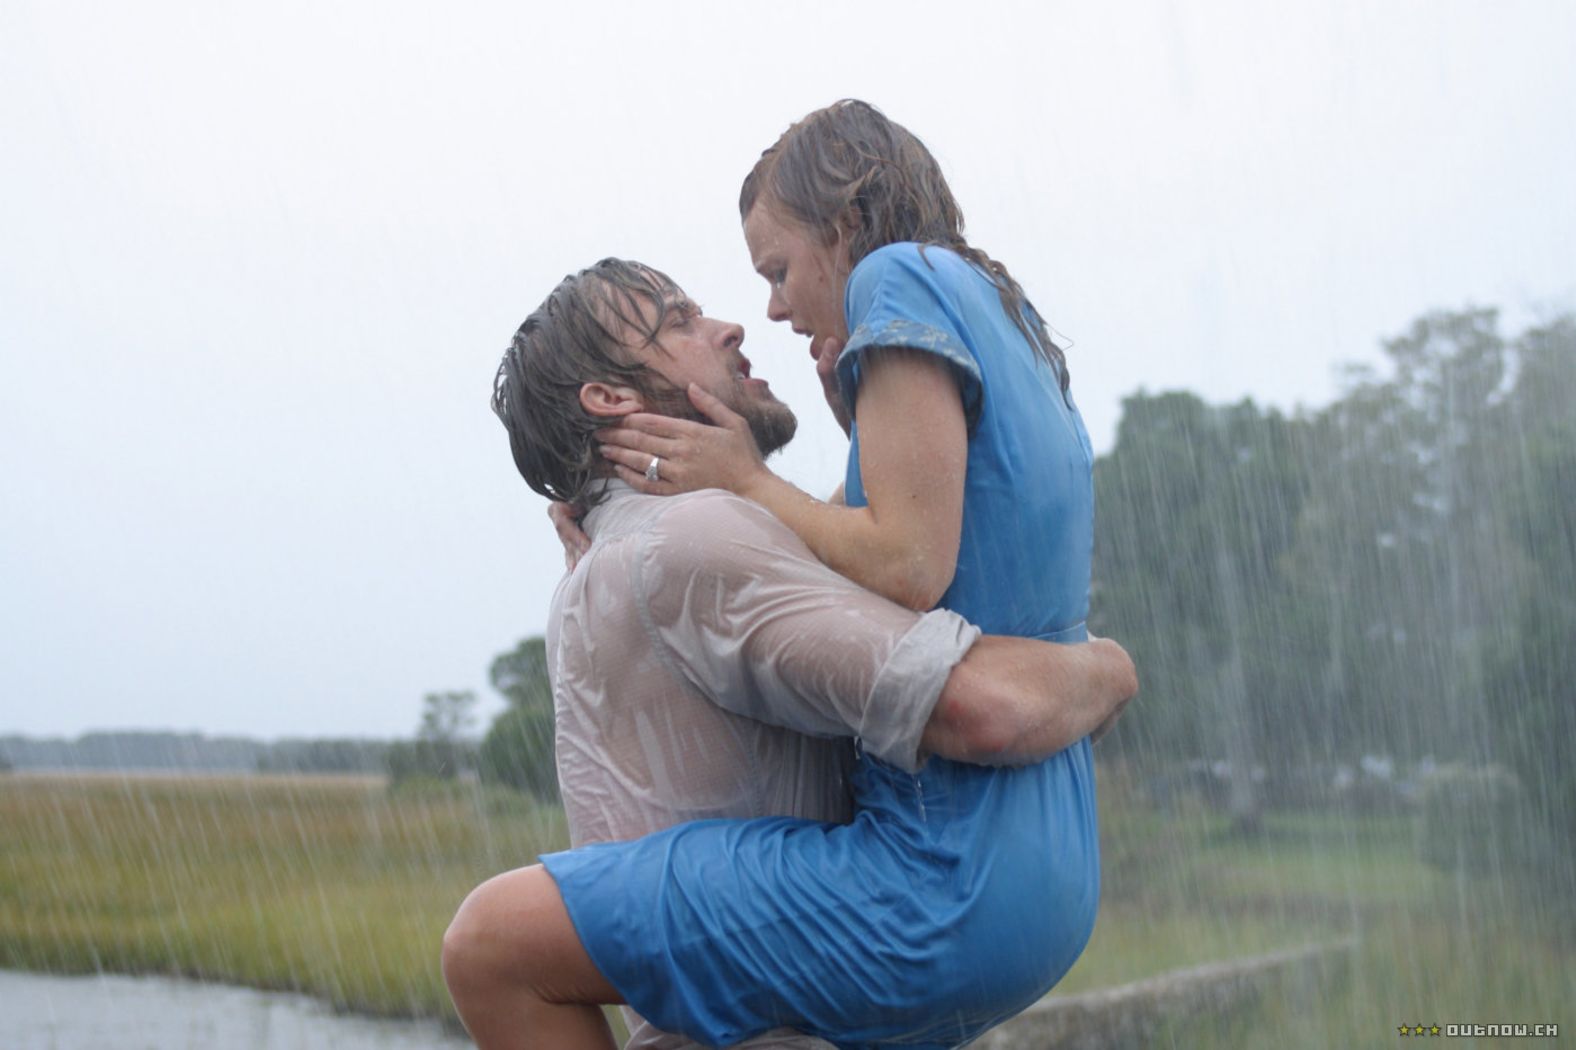 <strong>"The Notebook" (2004): </strong>Allie (Rachel McAdams) and Noah (Ryan Gosling) sizzled on screen in this tear-jerking love story that made the actors America's sweethearts for some time, an accomplishment that should be lauded if only because both of them are from Canada. The rain kiss MVP of the early aughts, "The Notebook" was a love story we vowed never to forget — and haven't been able to because it's always airing on cable TV. <br /> 